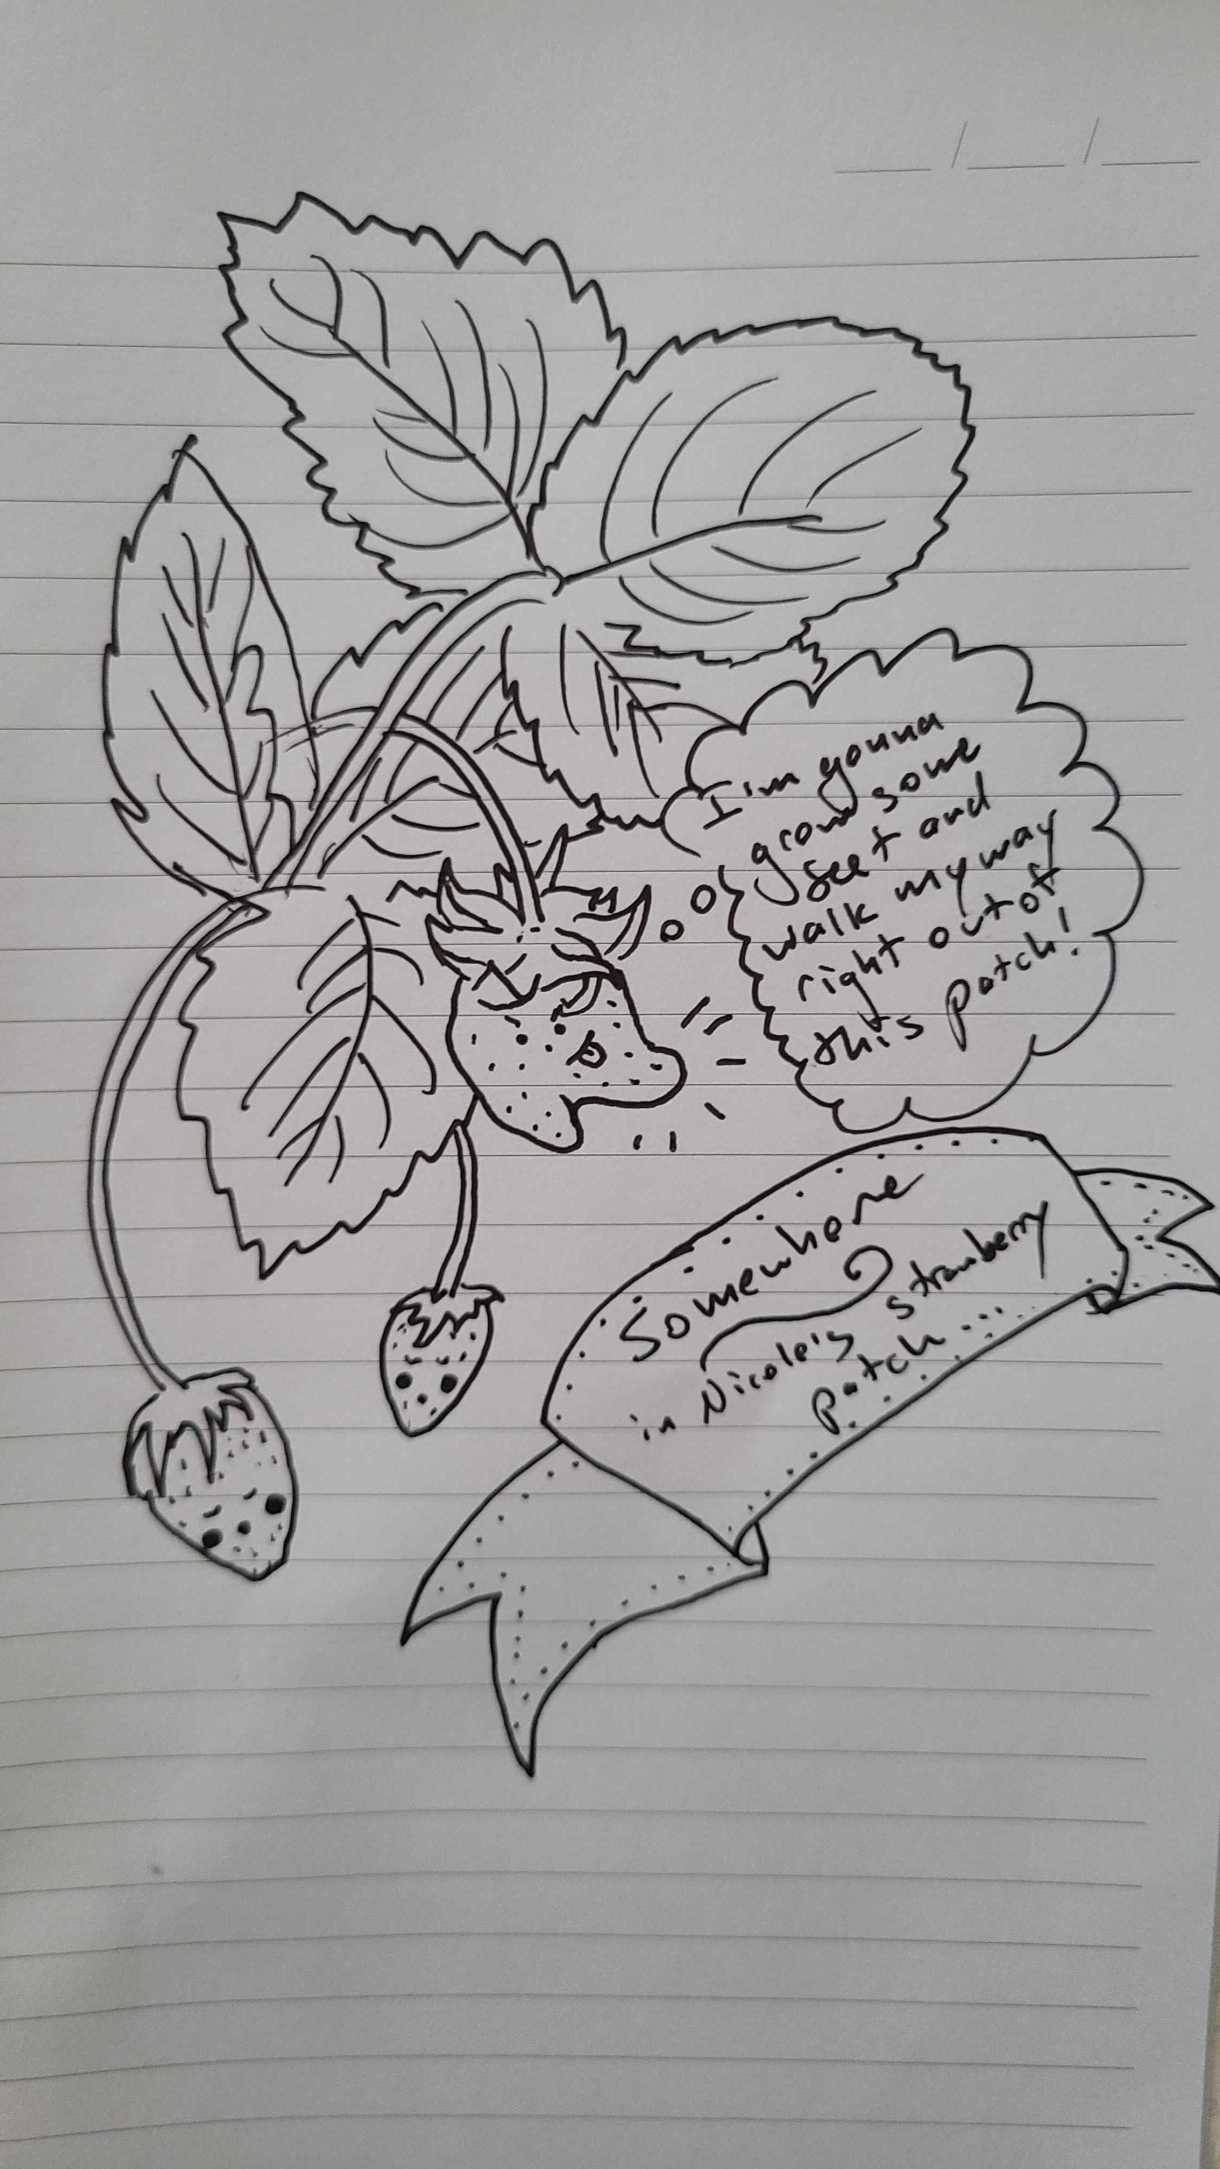 Nicole has doodled something in their notebook. It is labeled "somehwere in Nicole's strawberry patch" and features a few anthropomorphic strawberries, two normal shaped and sleeping and one that is growing in a way where it has two numbs on the bottom. It has a face of devious concentration and a thought bubble reads "I'm gonna grow some feet and walk my way right out of this patch!"